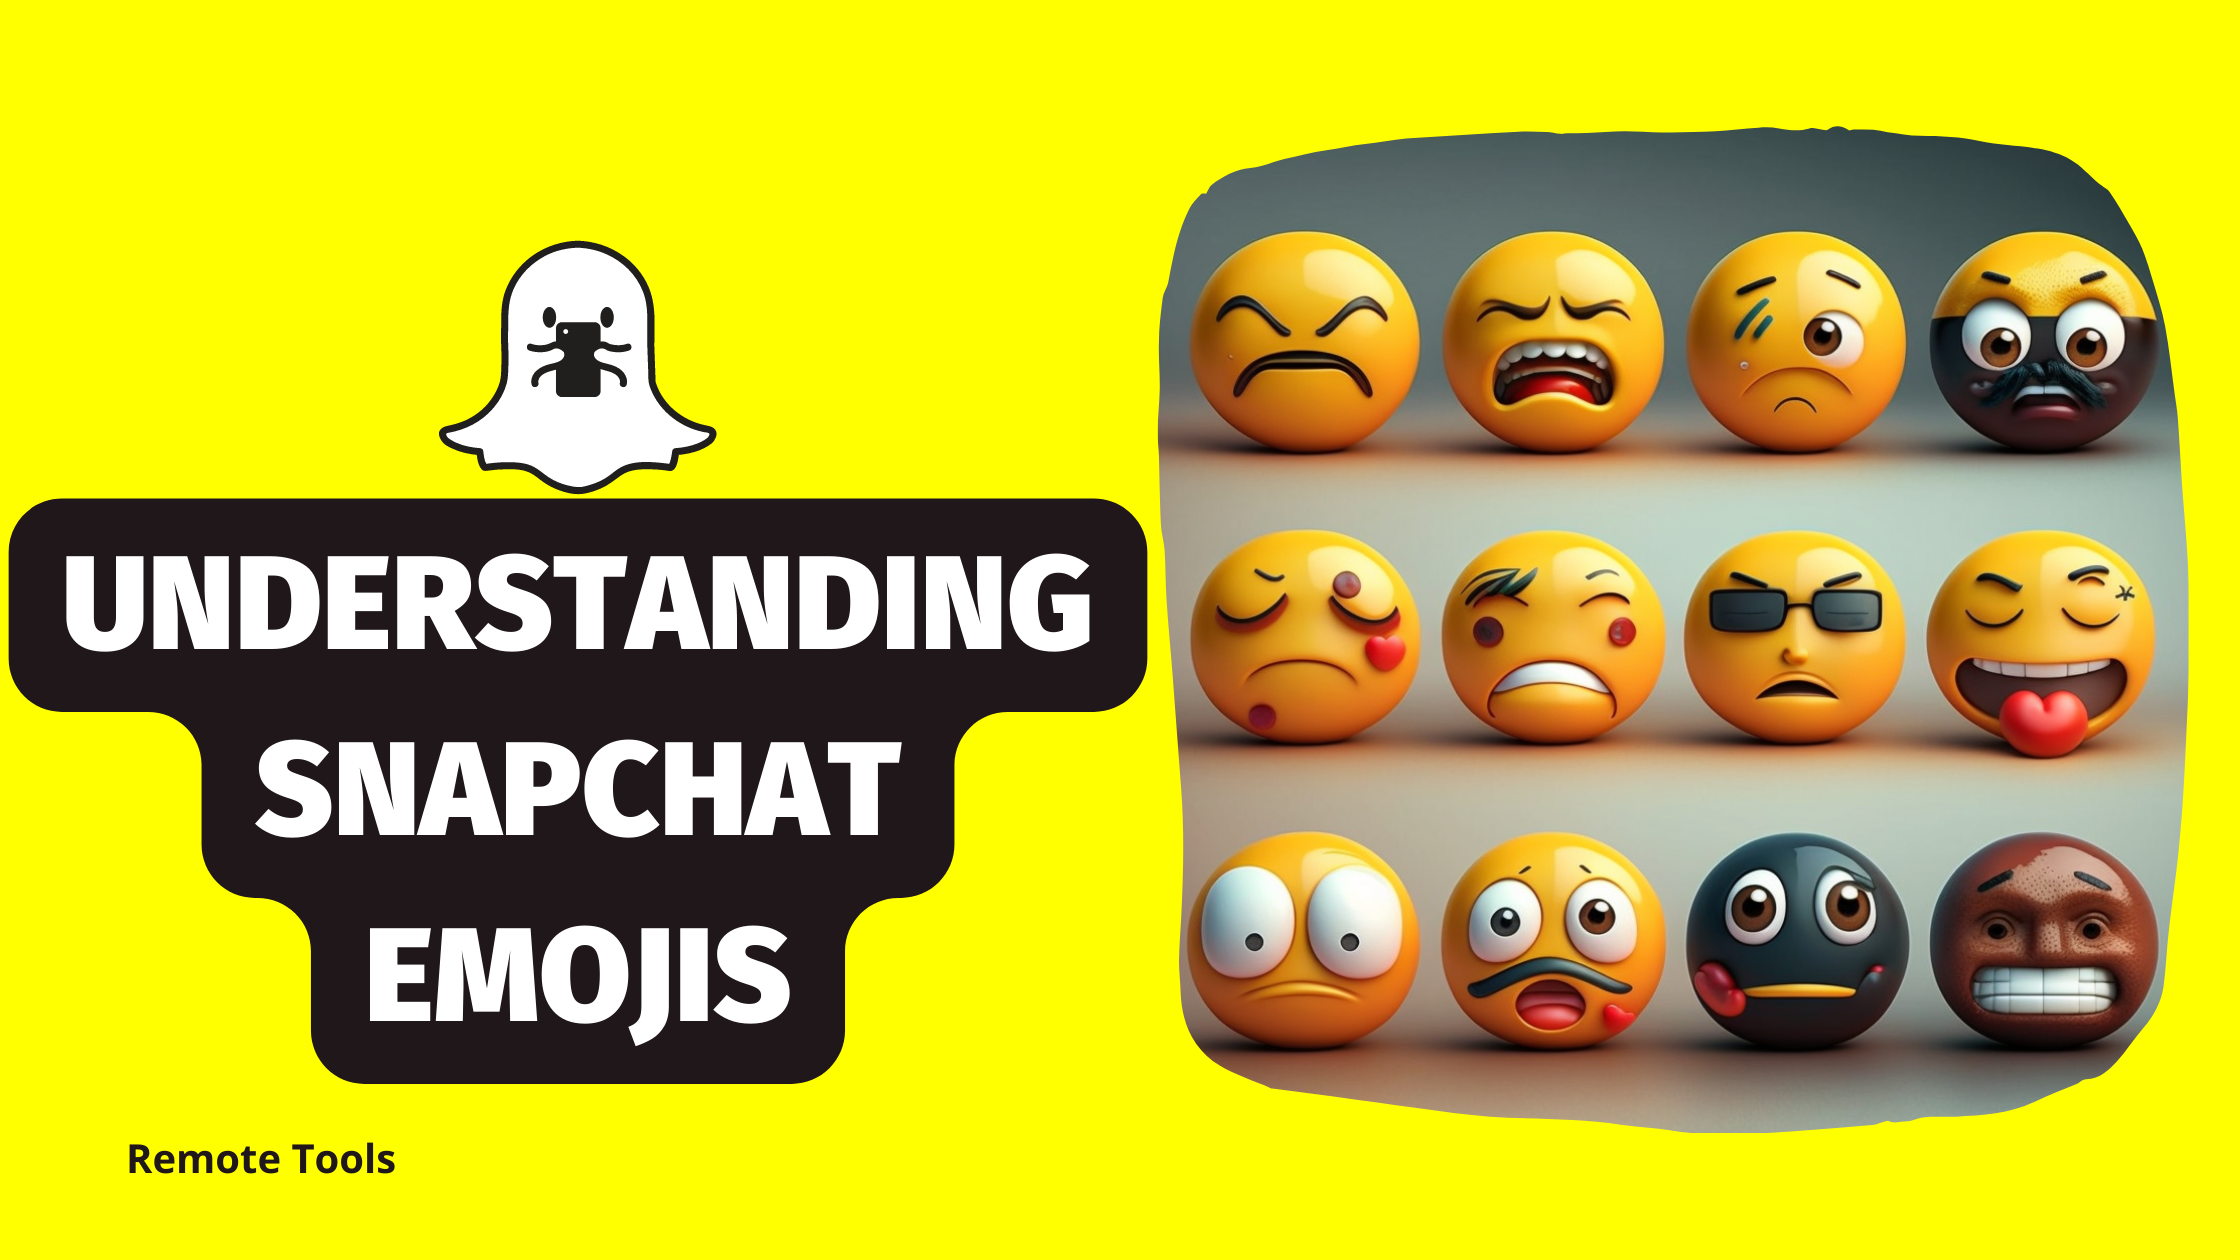 Remote.tools shares everything you should know about Snapchat emojis